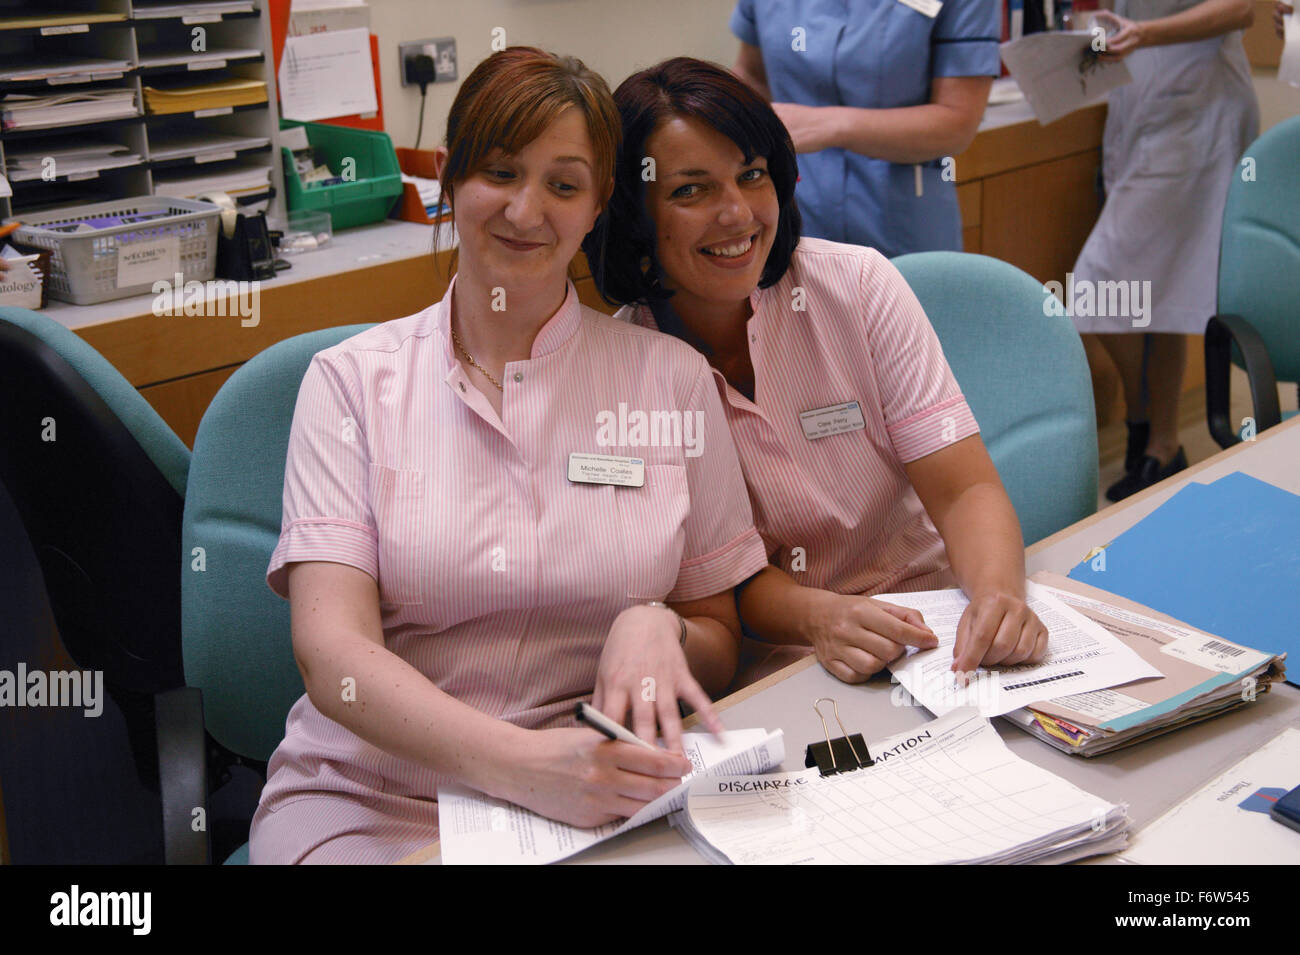 Two trainee healthcare workers sitting behind hospital desk smiling, Stock Photo